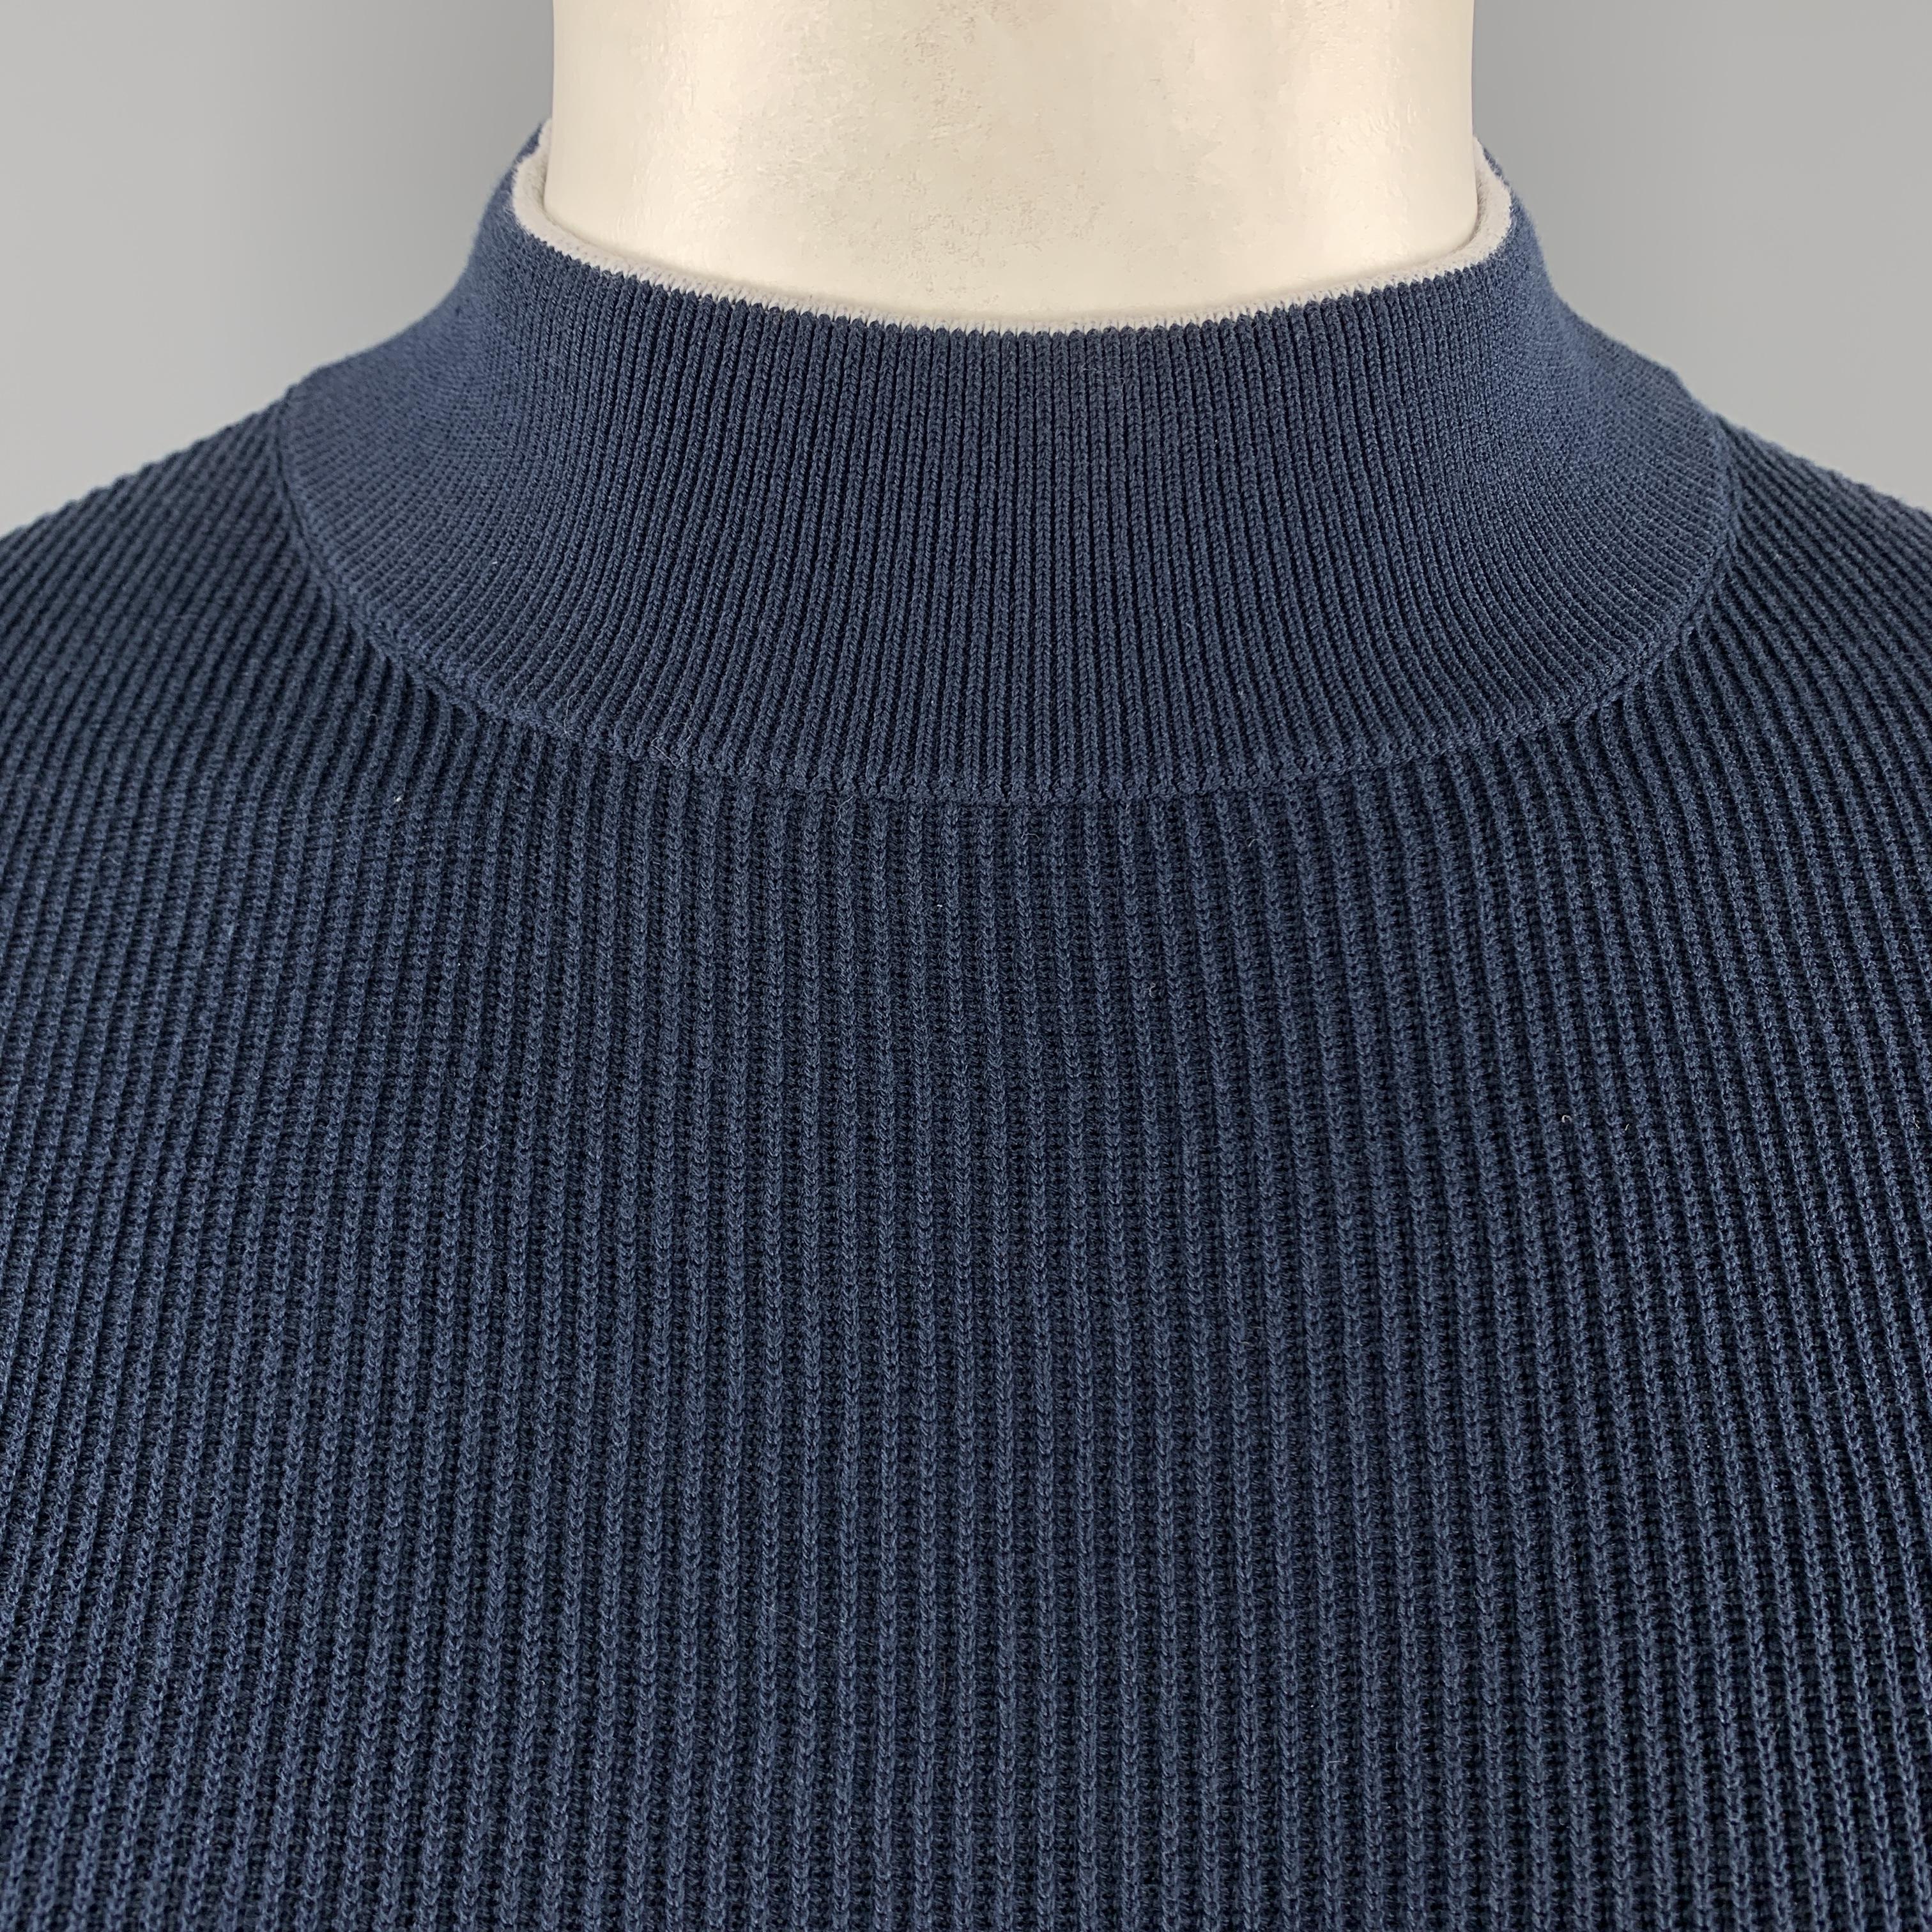 BRUNELLO CUCINELLI pullover comes in navy blue cotton ribbed knit with a high mock neck collar trimmed with a gray stripe. Made in Italy.

New with Tags. 
Marked: IT 54

Measurements:

Shoulder: 17 in.
Chest: 46  in.
Sleeve: 29 in.
Length: 30 in.  